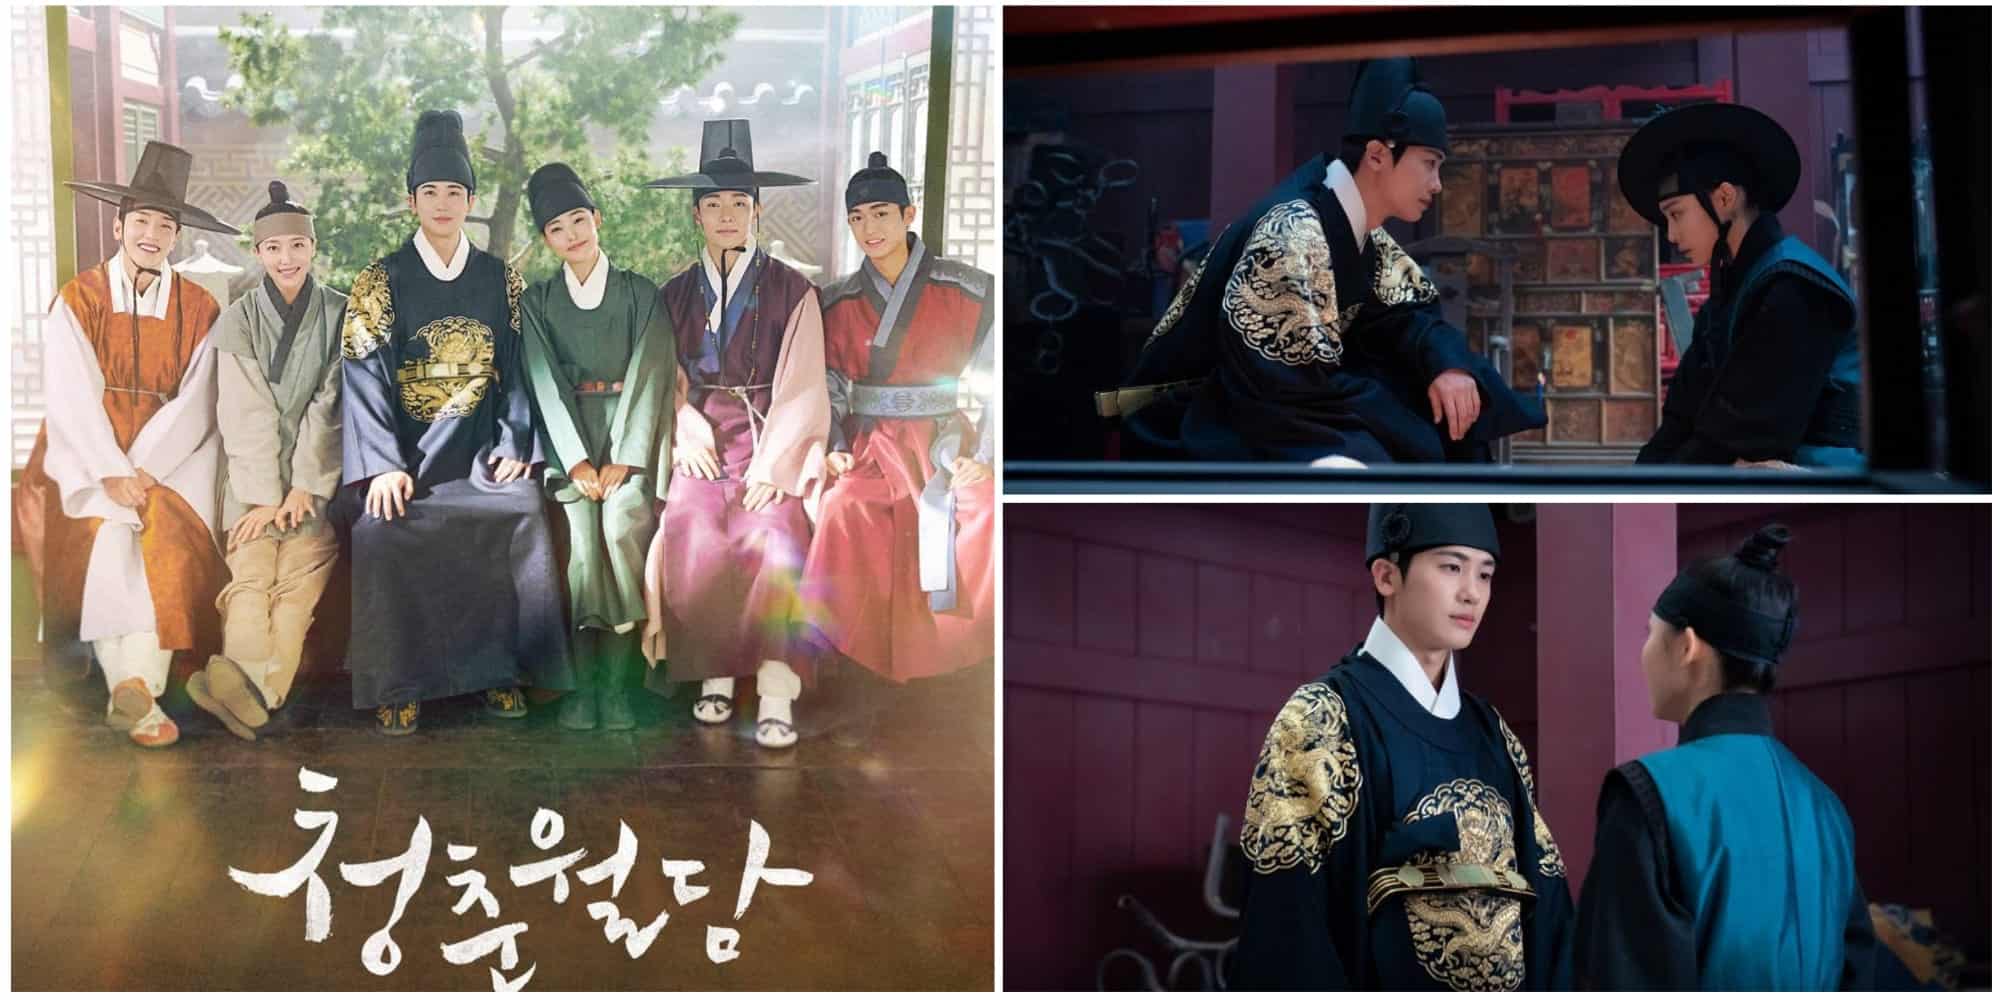 Our Blooming Youth Historical Romance K-drama Episode 6 Release Date